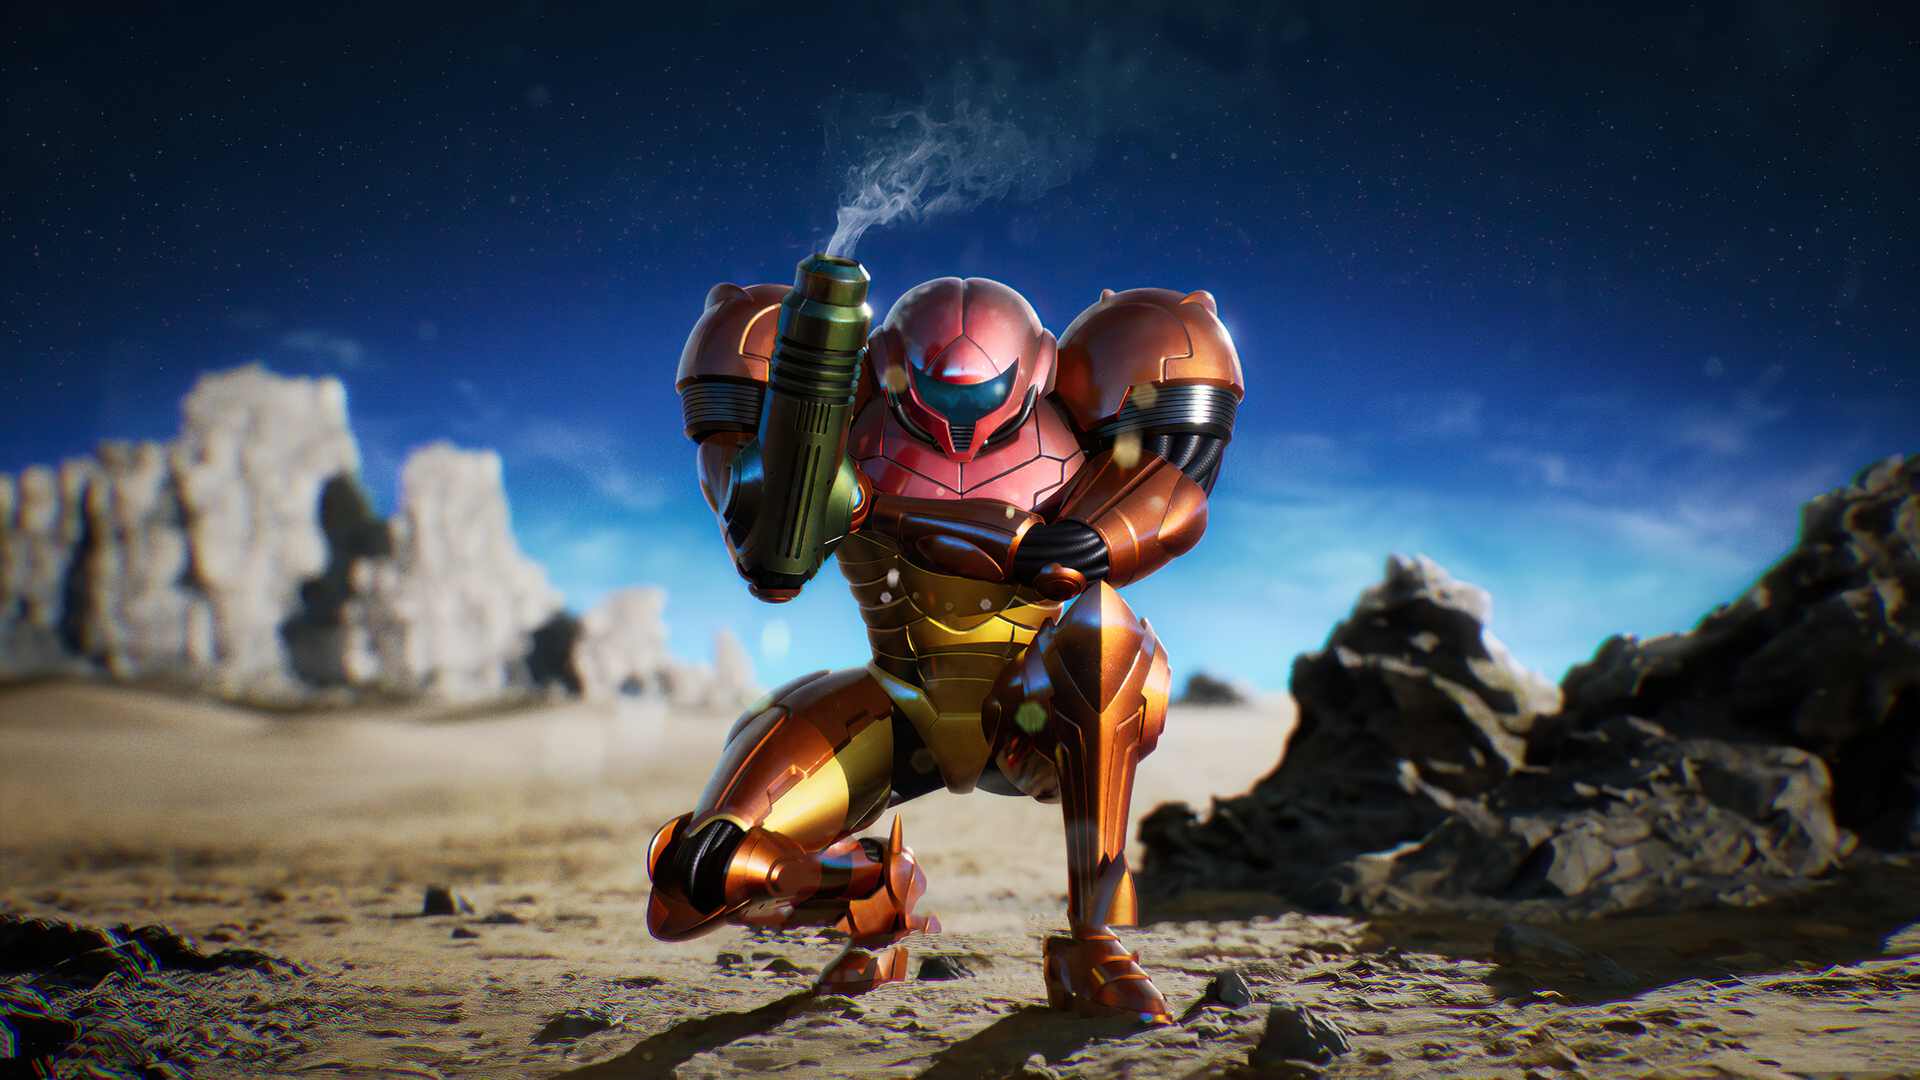 1920x1080 Metroid Ii Return Of Samus Laptop Full Hd 1080p Hd 4k Wallpapers Images Backgrounds Photos And Pictures